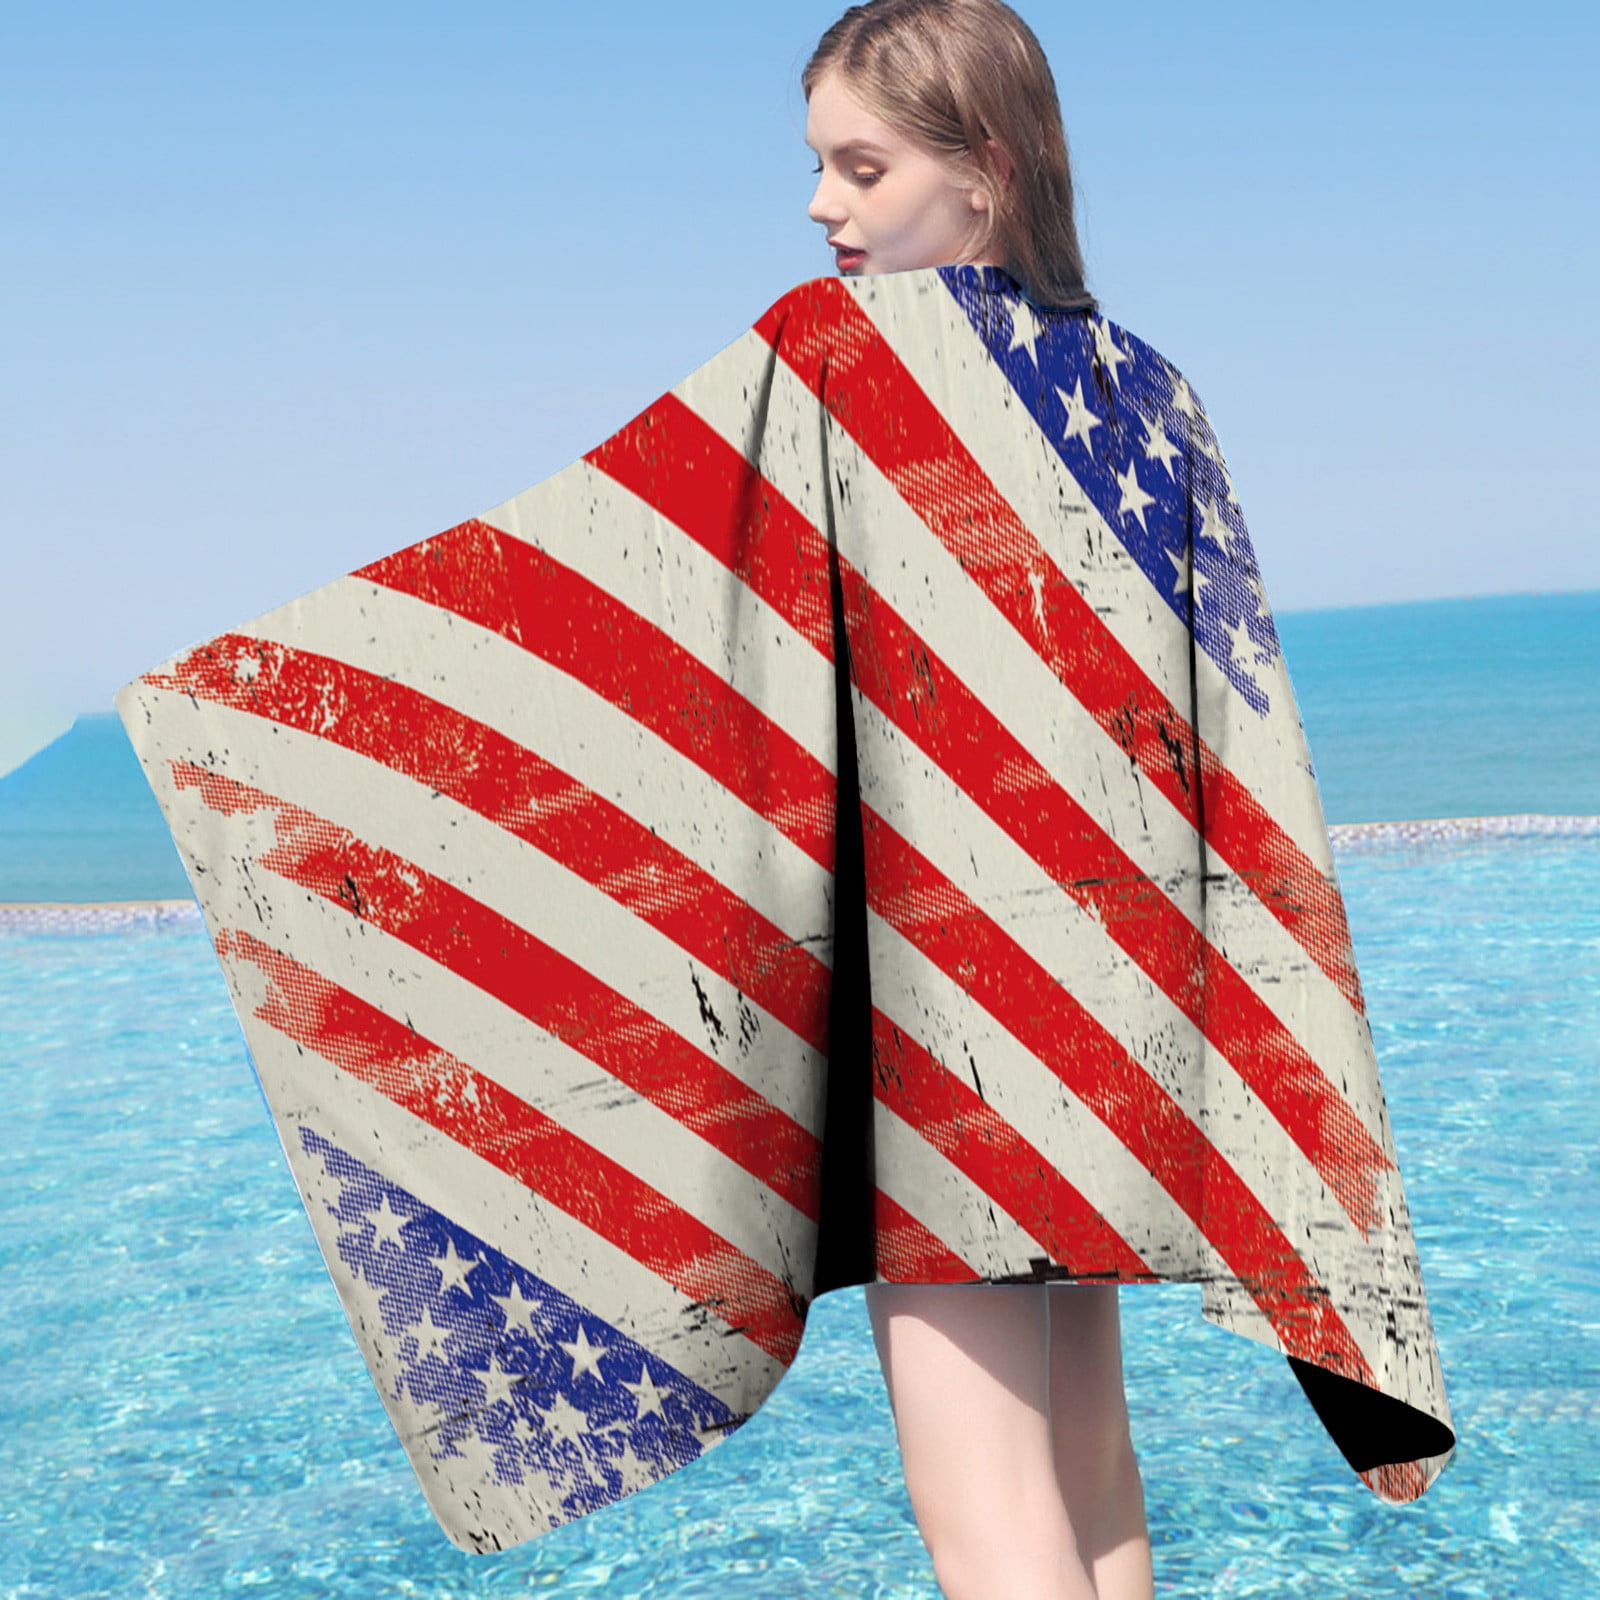 American Flag Beach Towel 100% Cotton Large Soft Bath Towel by Hencely 